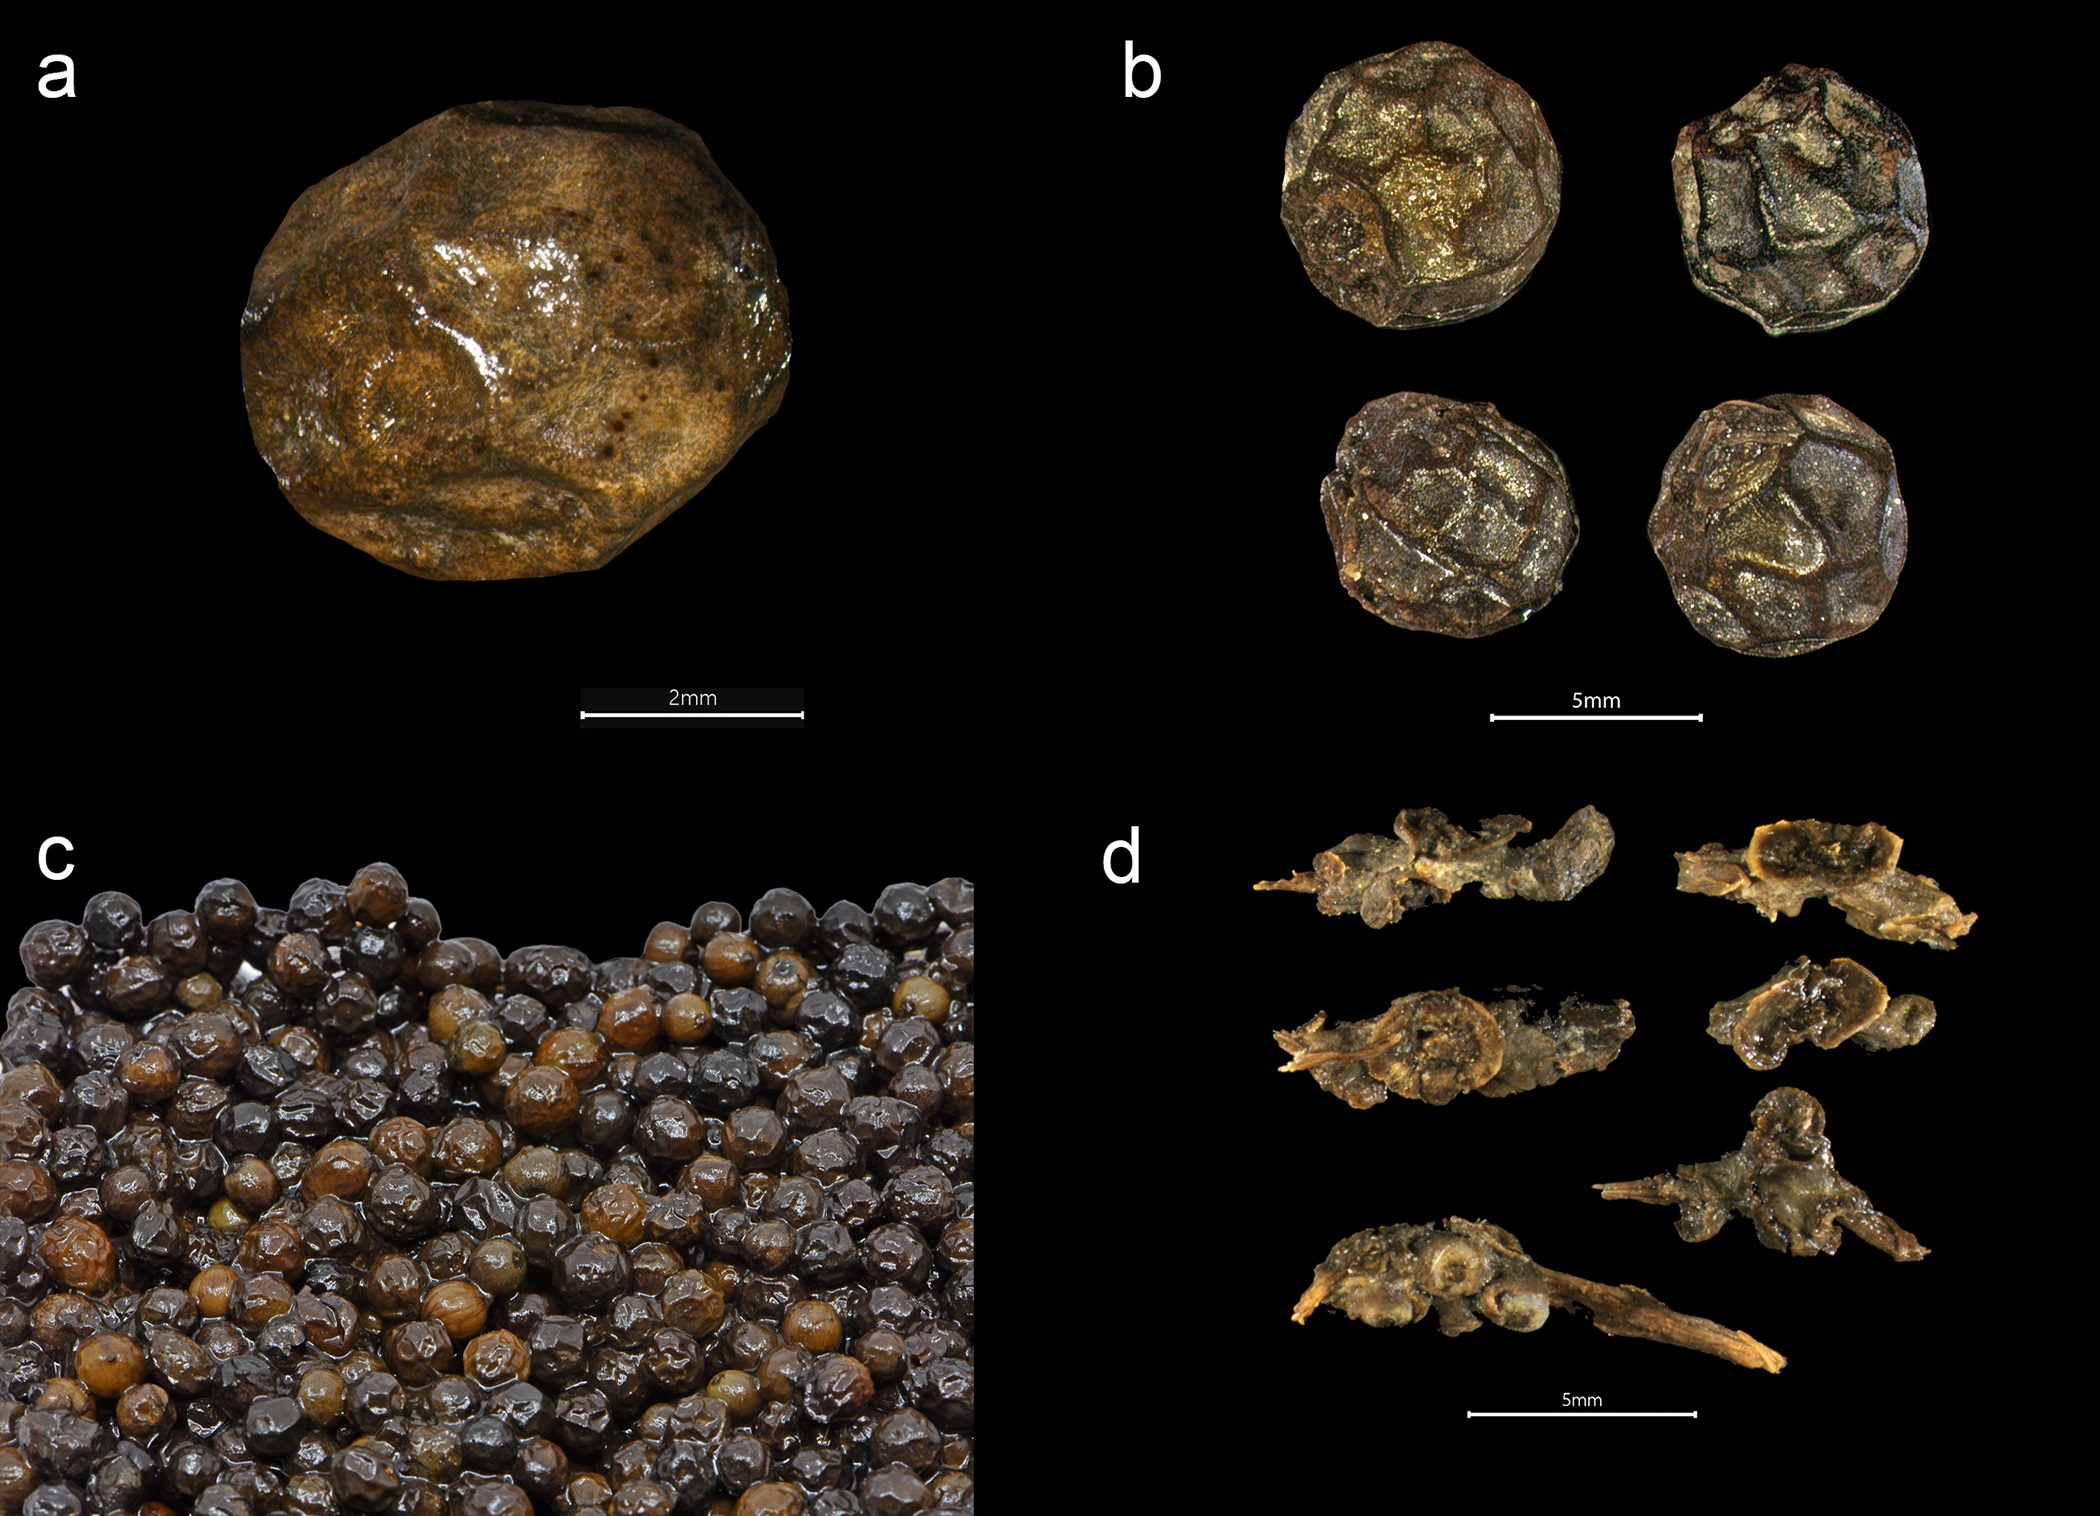 Black pepper from the Gribshunden shipwreck. Plant parts of black pepper: a-c) different views of peppercorns, d) stalk segments, some with unripe berries of pepper. Image credit: Larsson, Foley, PLOS ONE, 2023